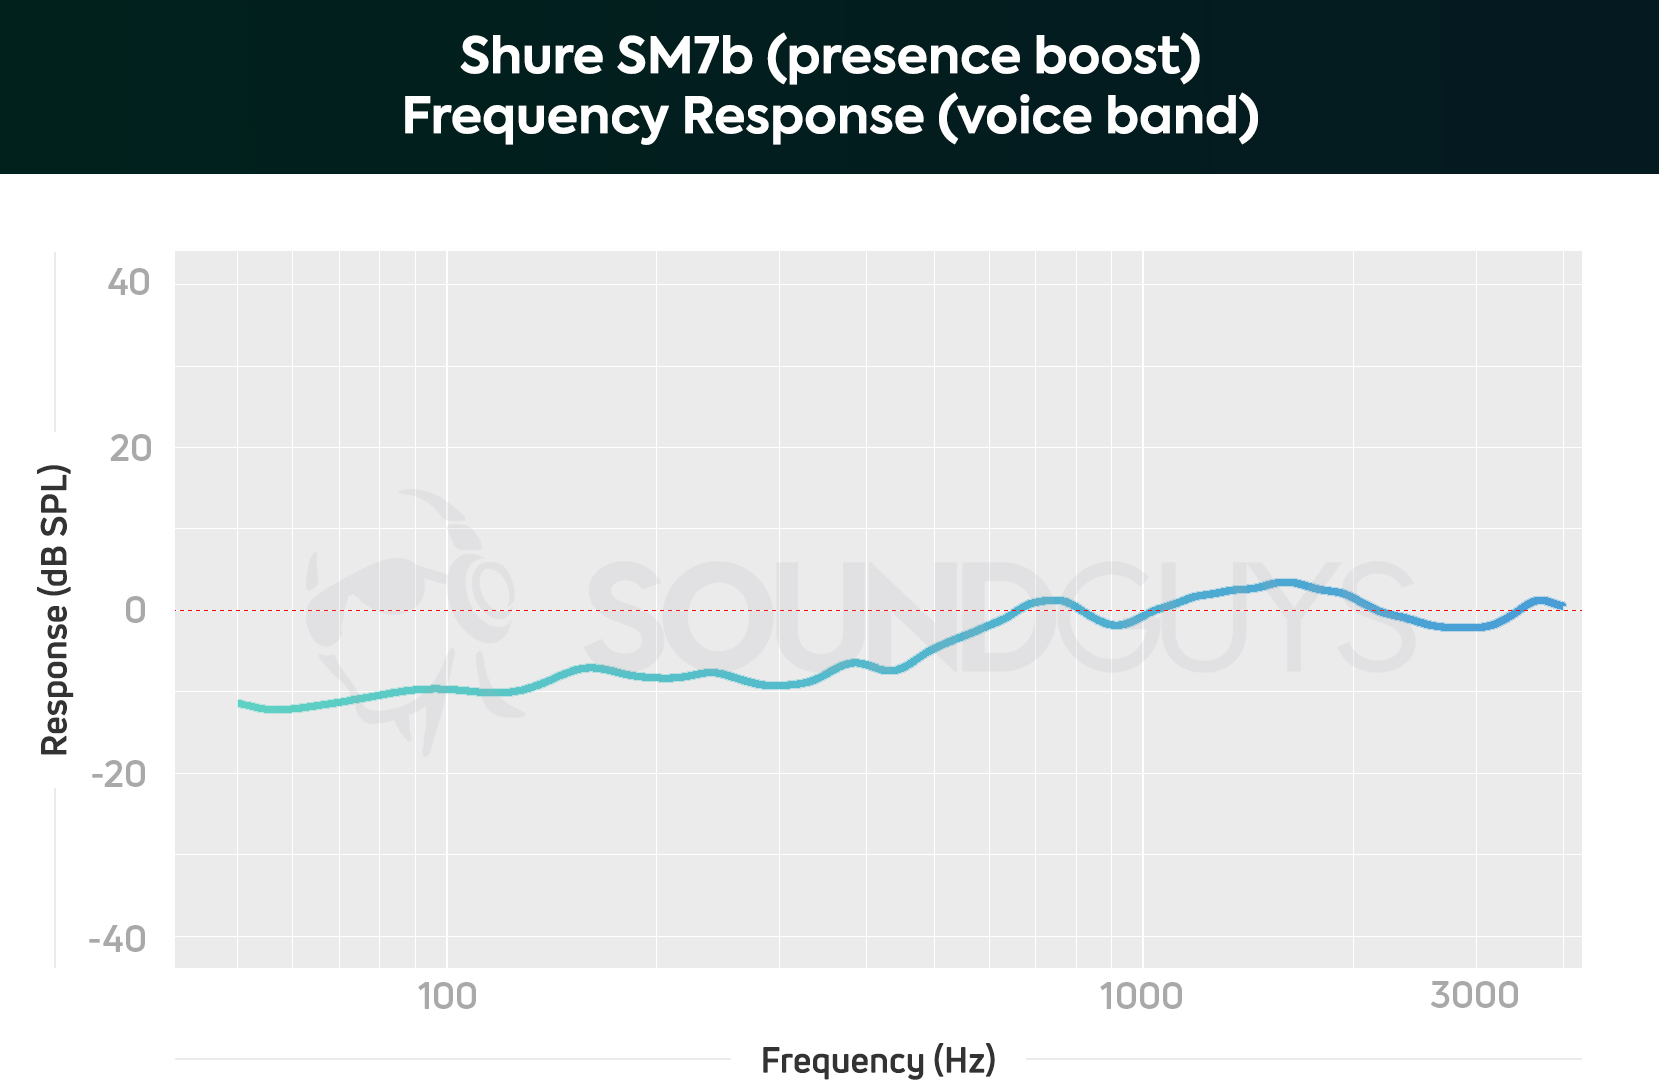 A chart depicting the Shure SM7B dynamic microphone frequency response limited to the human voice band with presence boost mode on.